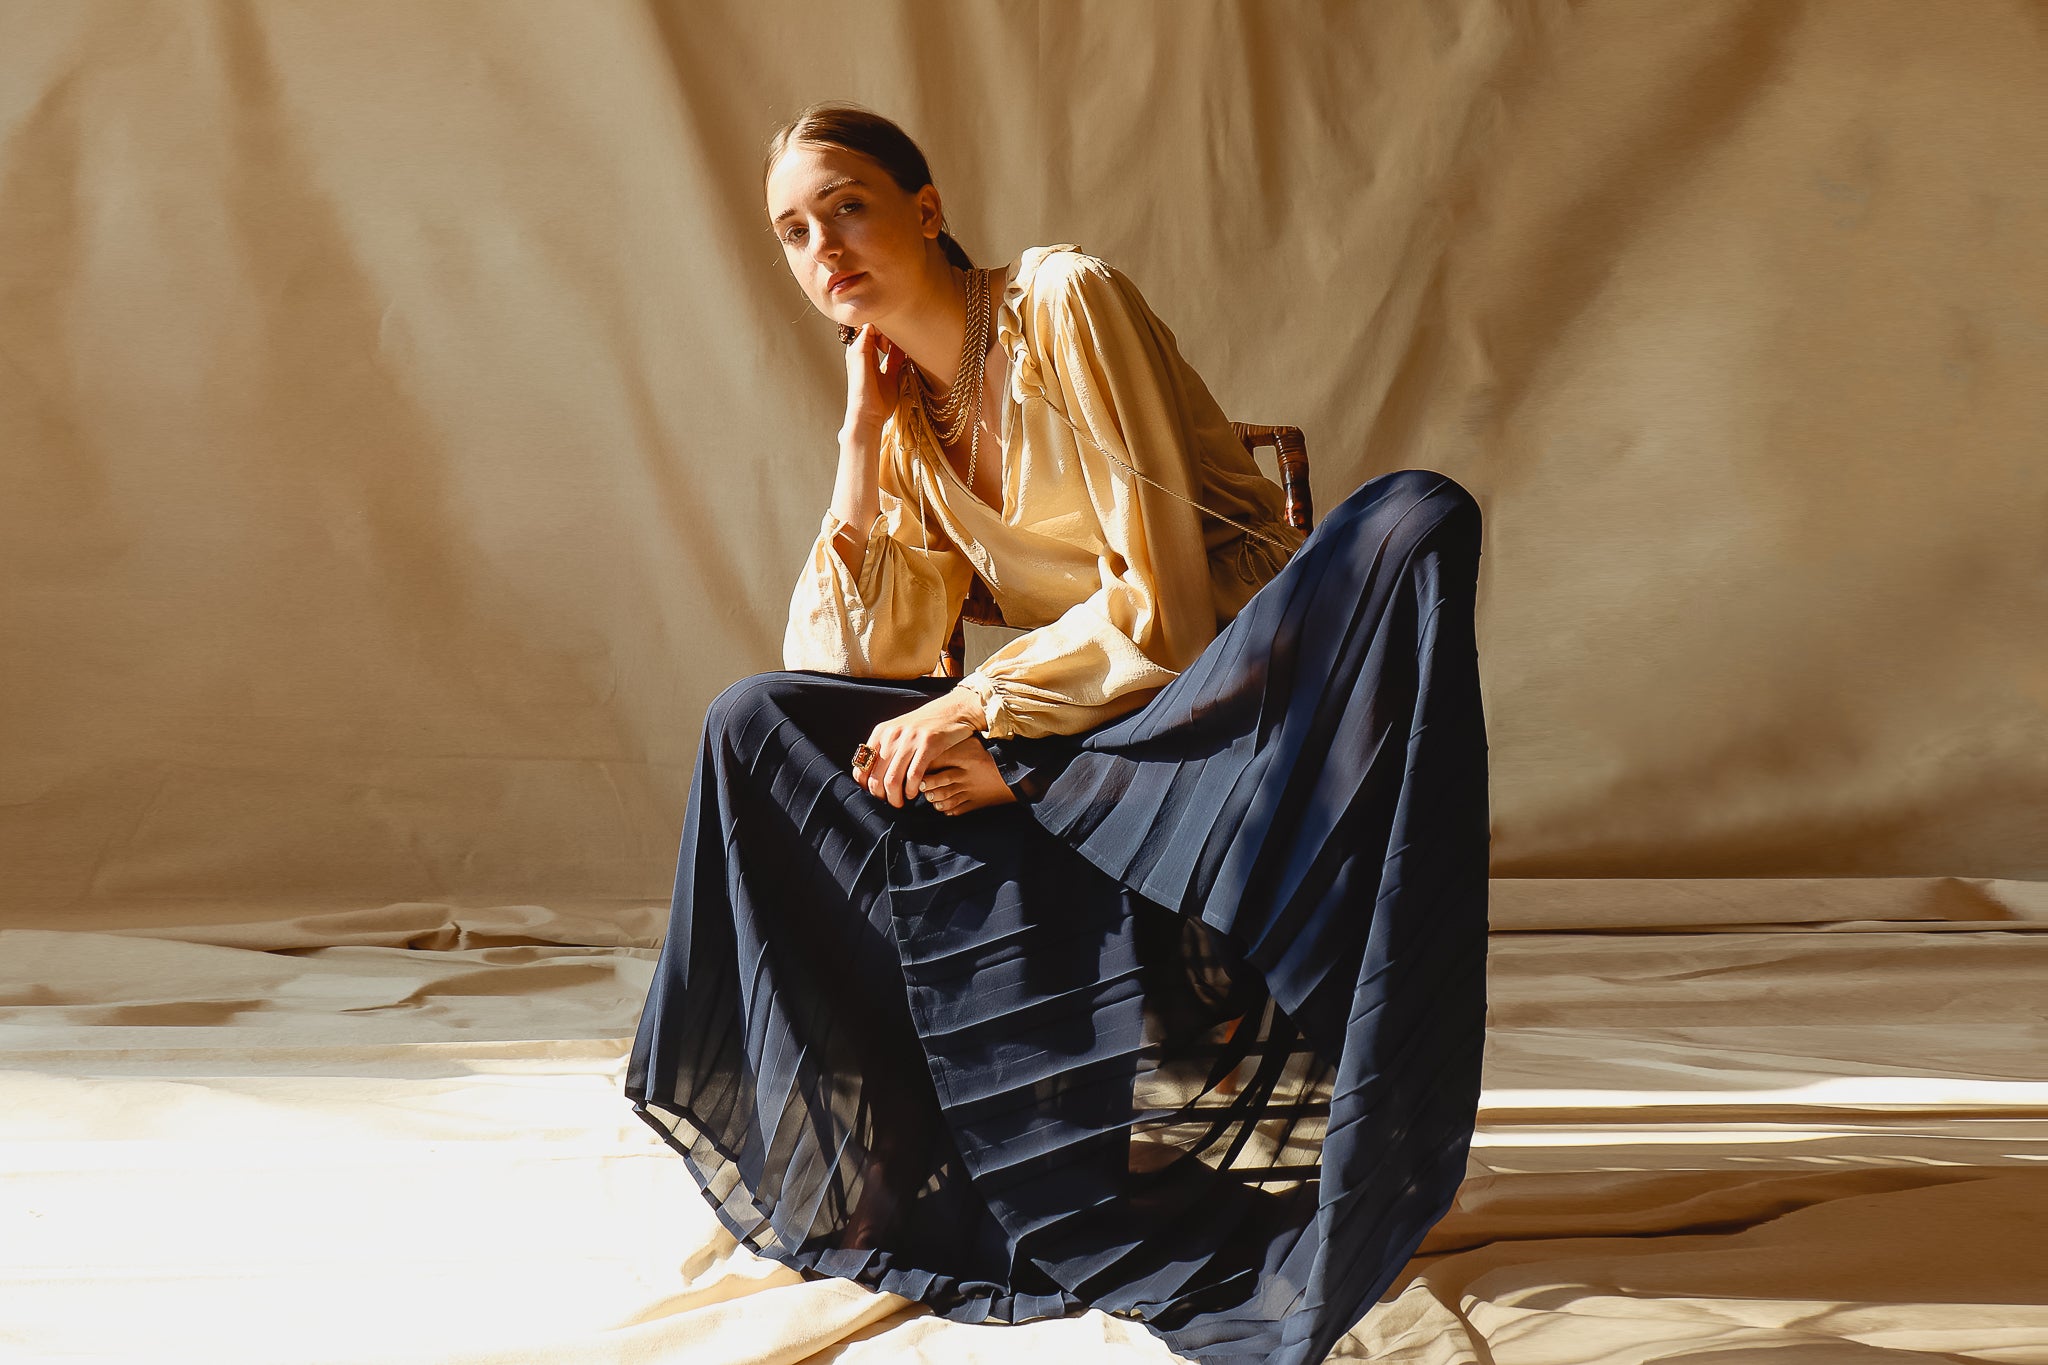 Recess Vintage Consignment LA Girl sitting in beige YSL Blouse & Mila Schon Sheer Palazzo Pants